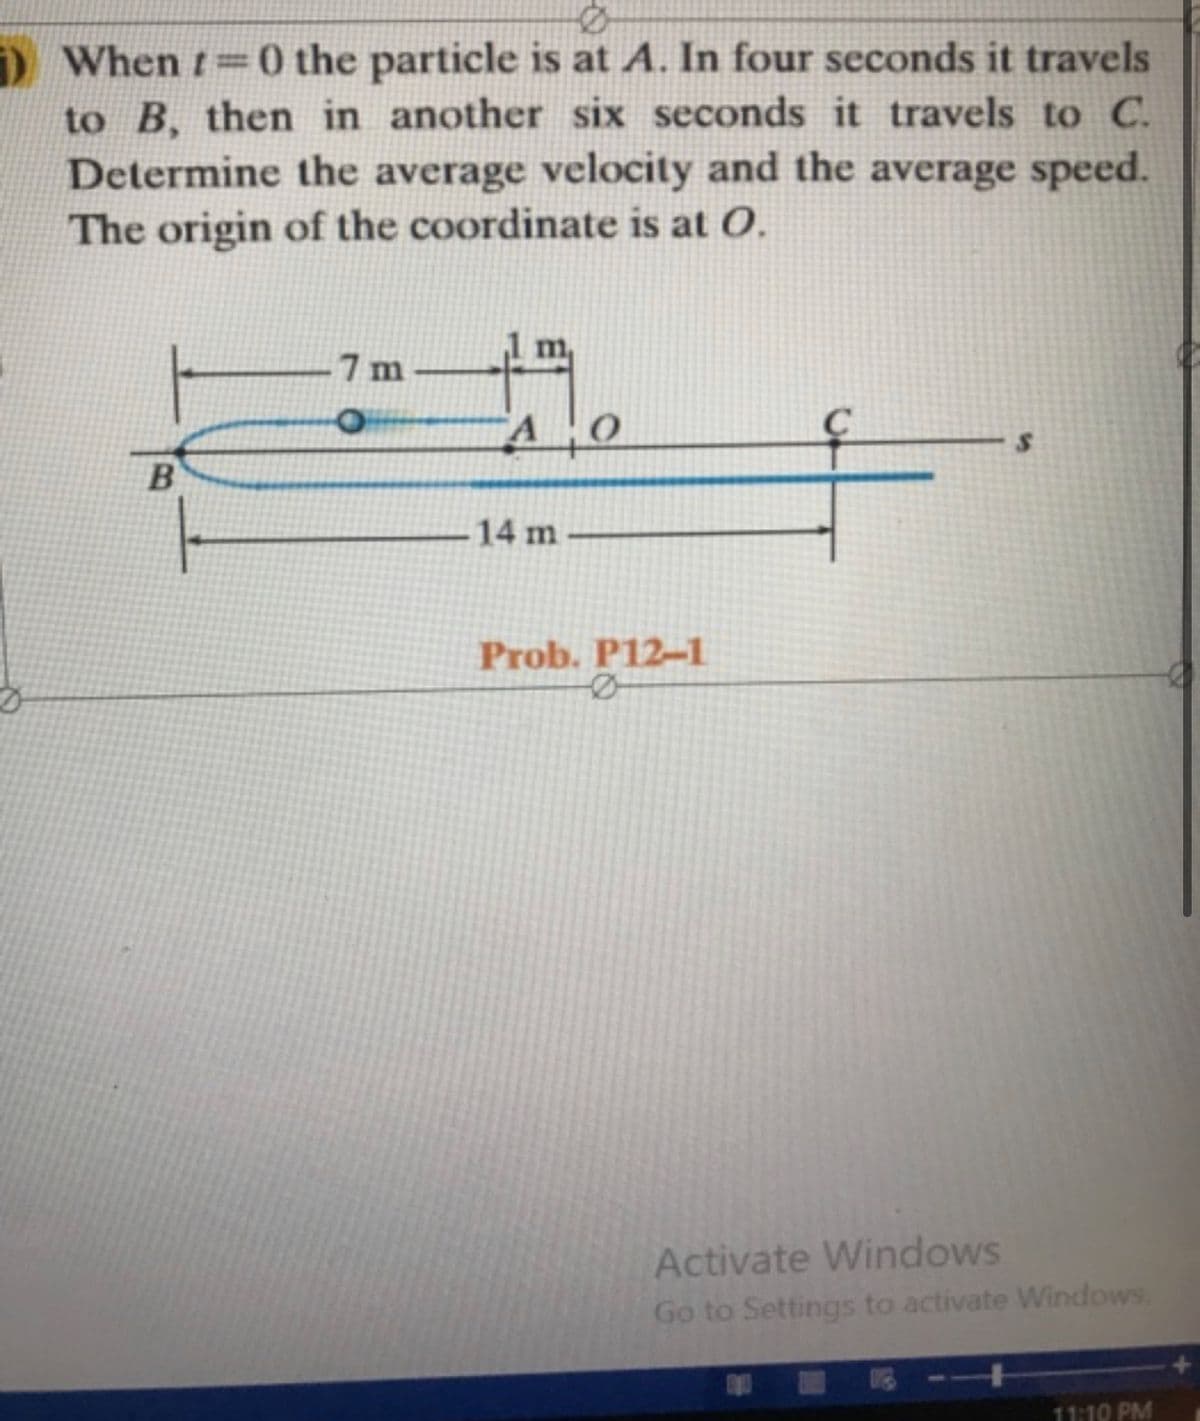 ) When t=0 the particle is at A. In four seconds it travels
to B, then in another six seconds it travels to C.
Determine the average velocity and the average speed.
The origin of the coordinate is at O.
7 m
B
14 m
Prob. P12-1
Activate Windows
Go to Settings to activate Windows
11:10 PM
